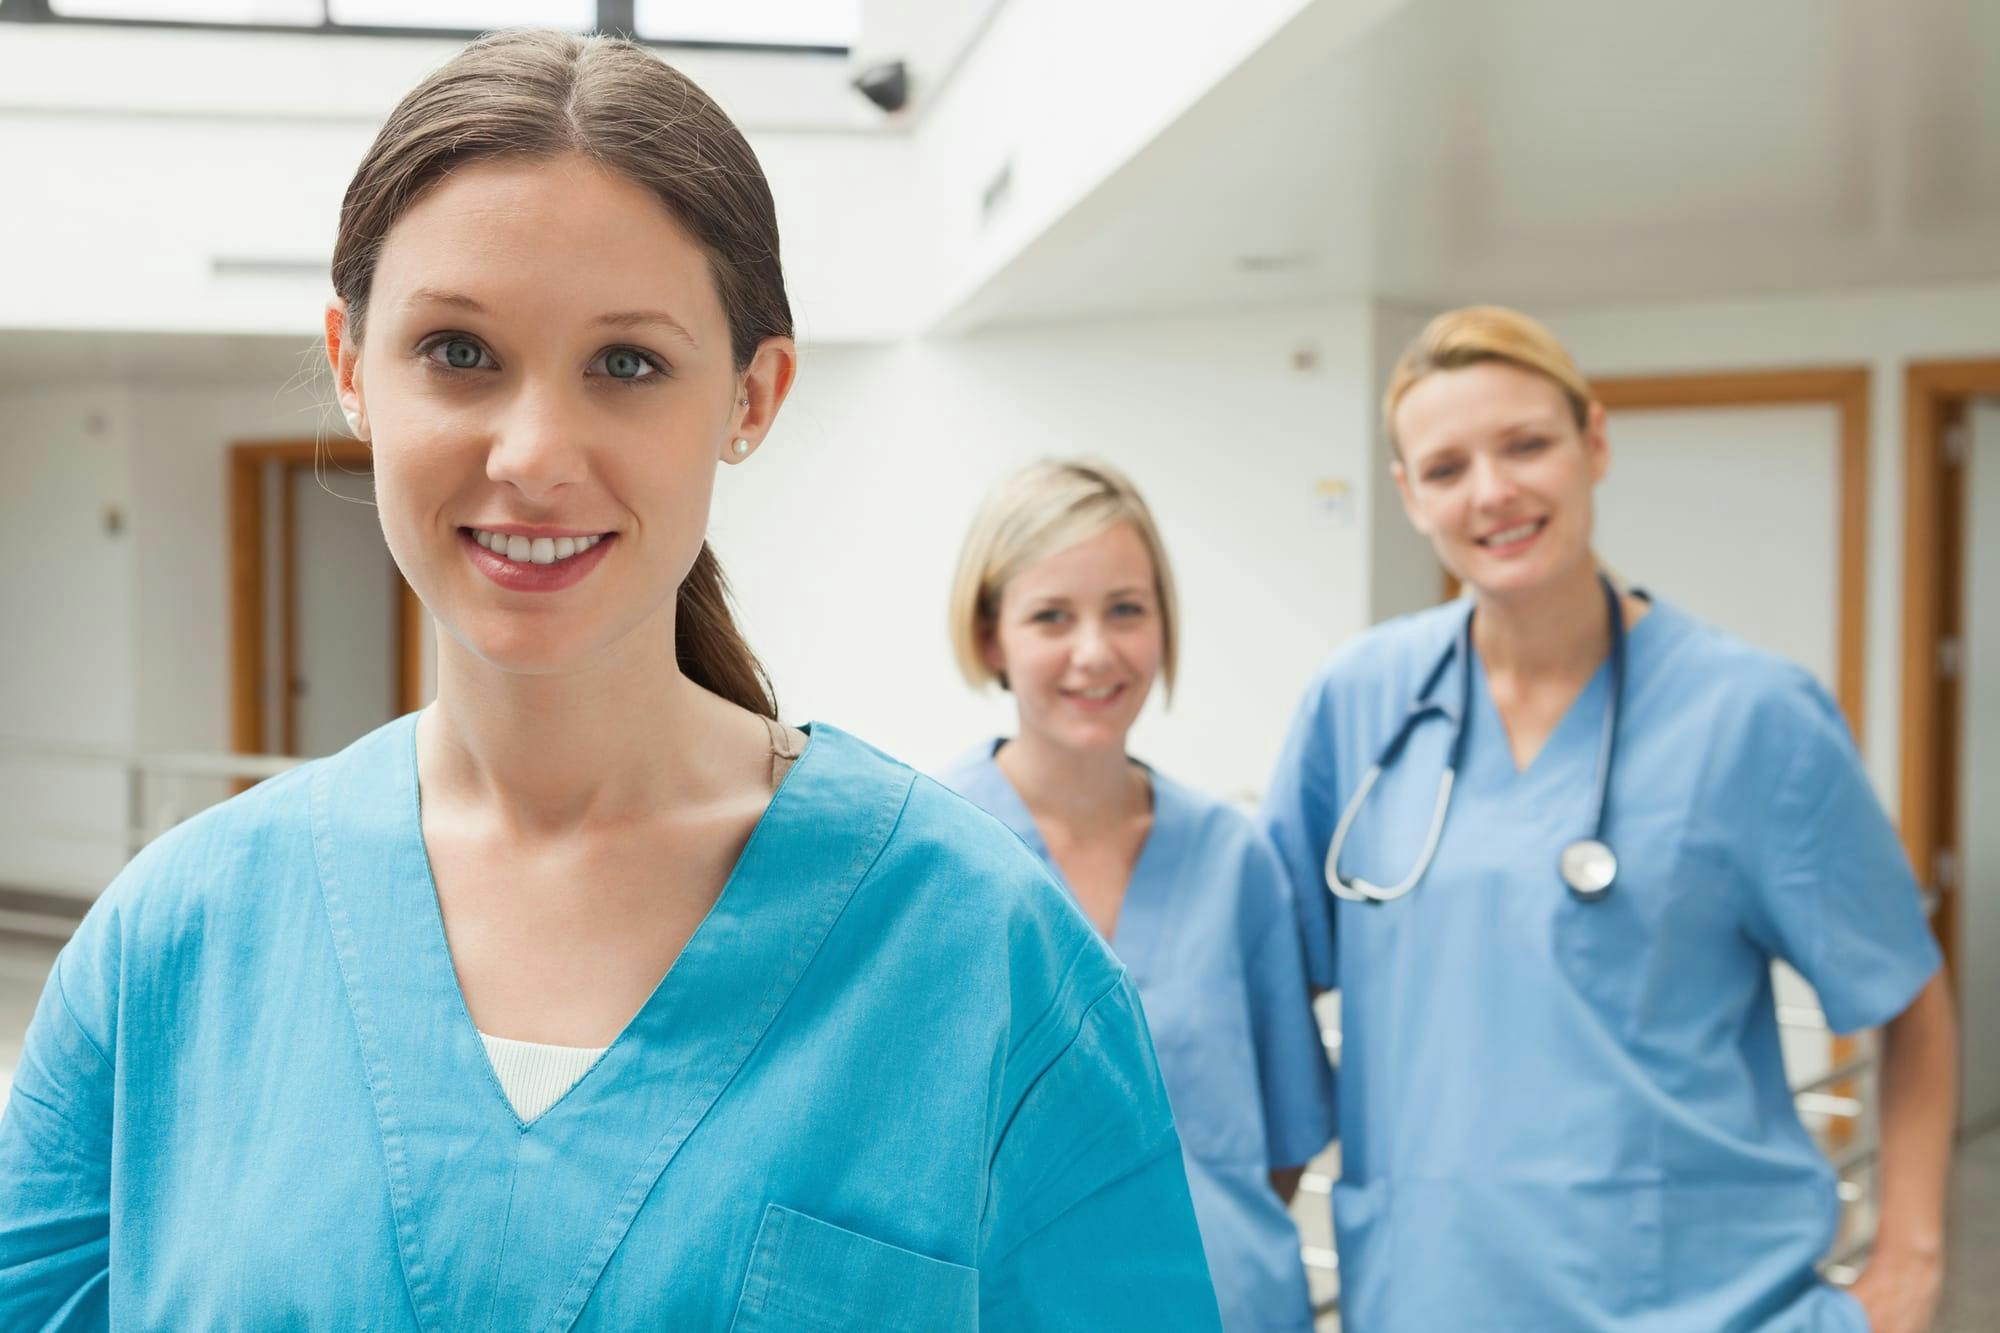 Medical Assistant vs CNA: What are the Differences?